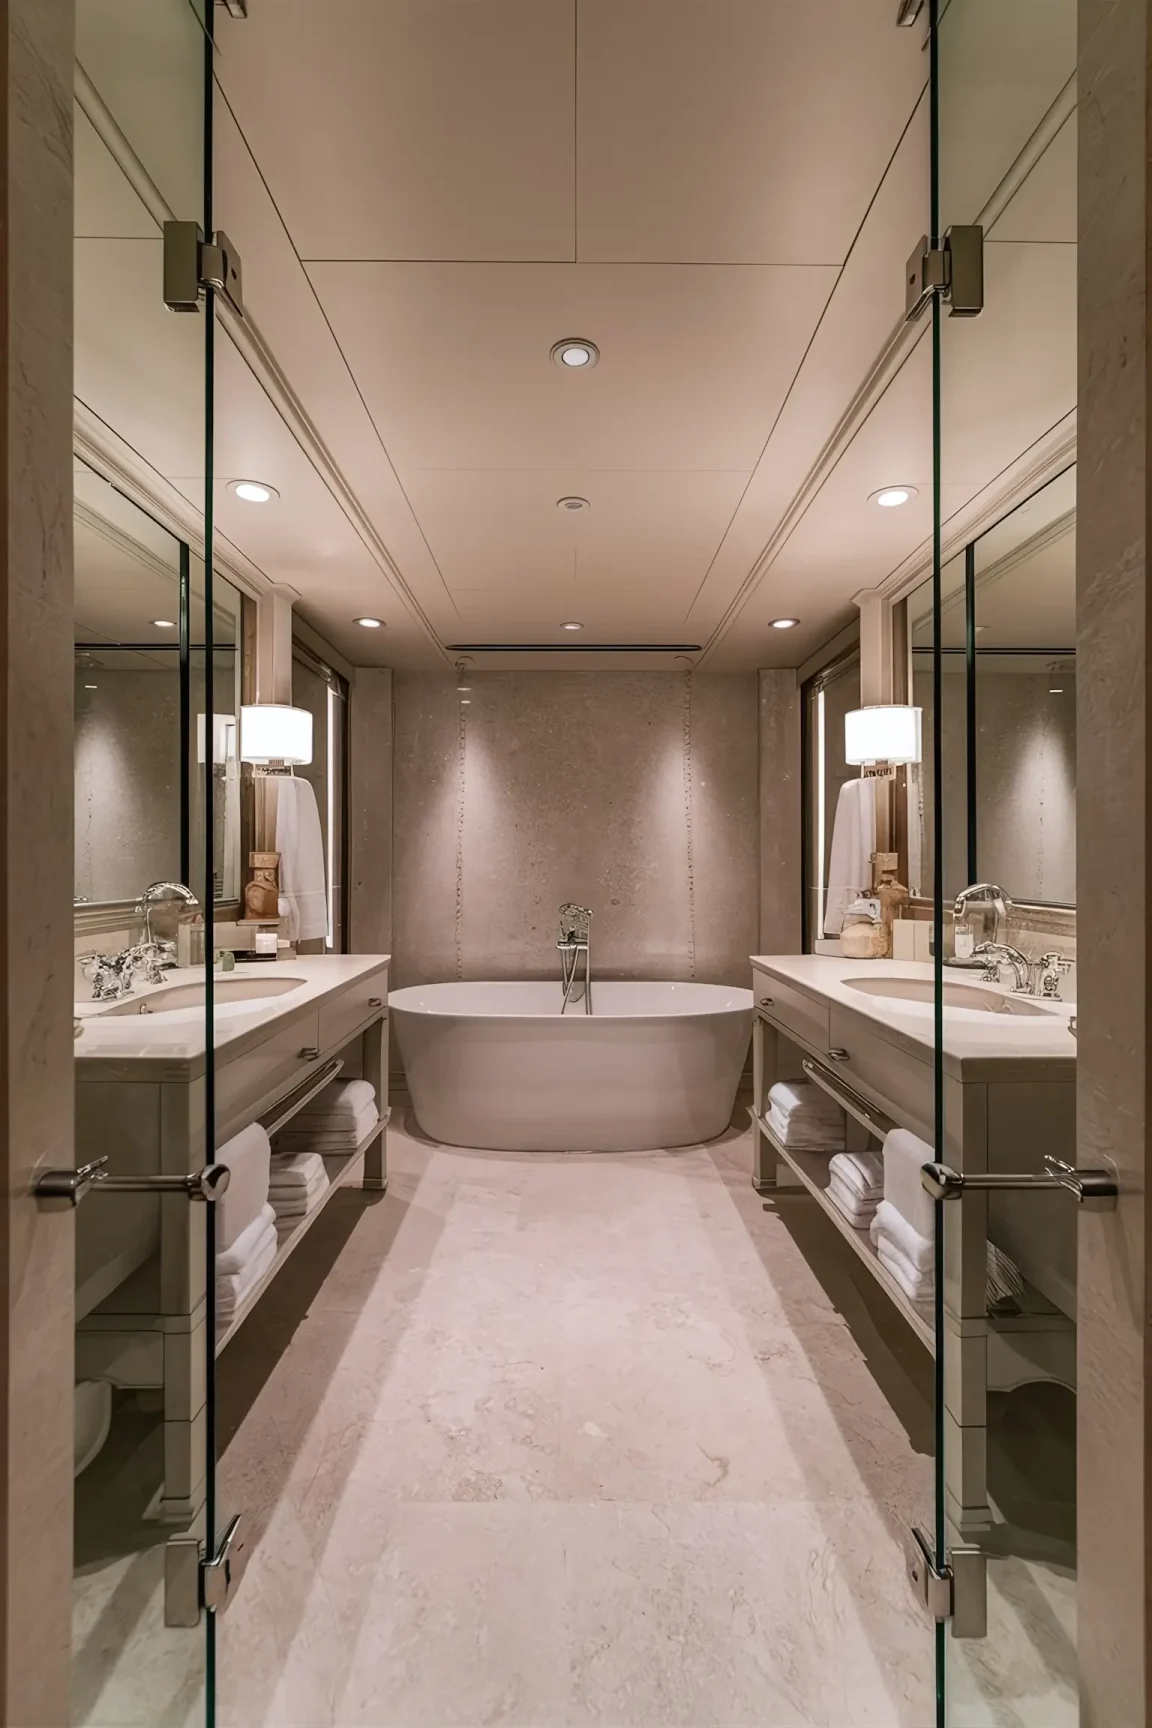 Neutral-themed bathroom with elegant decor and modern fixtures.